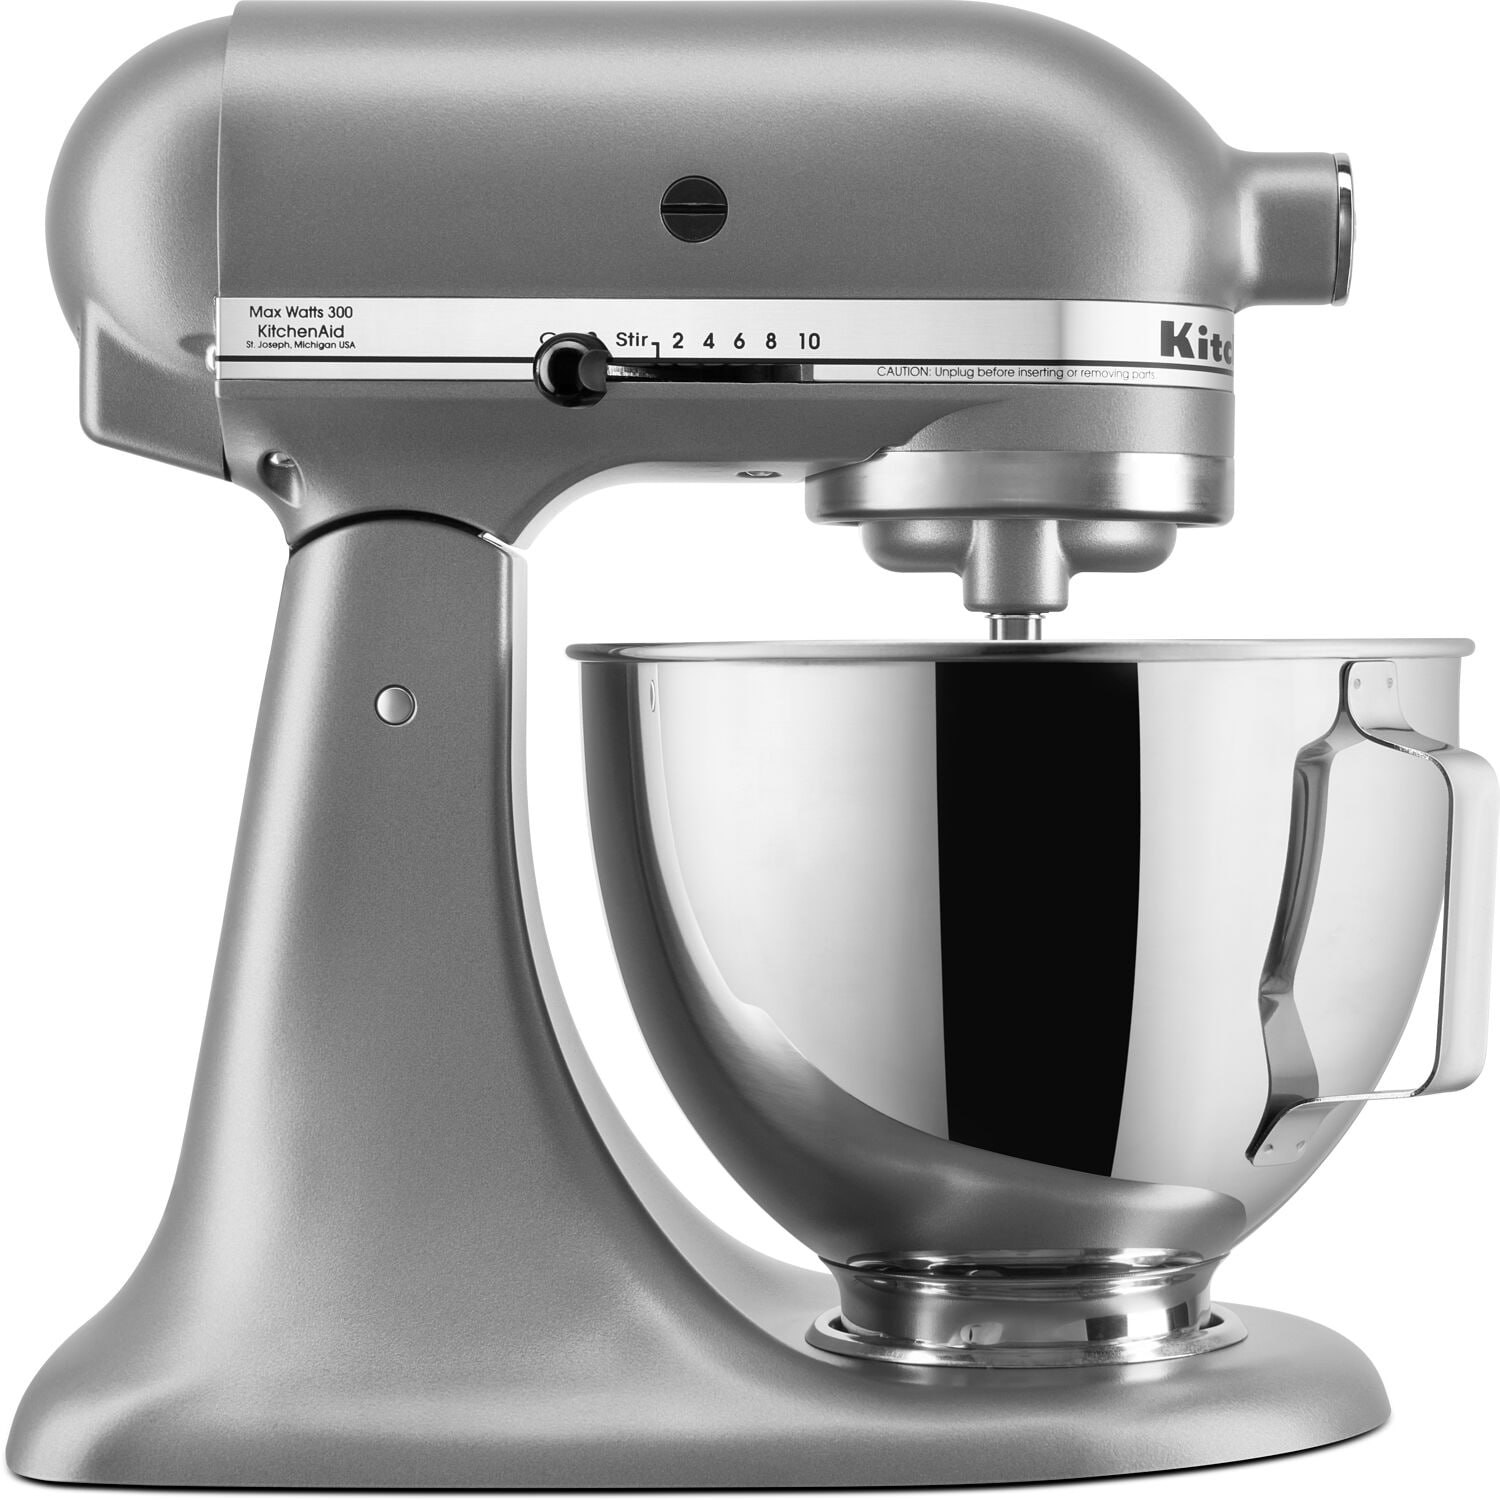 https://ak1.ostkcdn.com/images/products/is/images/direct/6e1df3d78980256d90f75f8059904105f47d6ae0/KitchenAid-Deluxe-4.5-Quart-Tilt-Head-Stand-Mixer-in-Silver.jpg